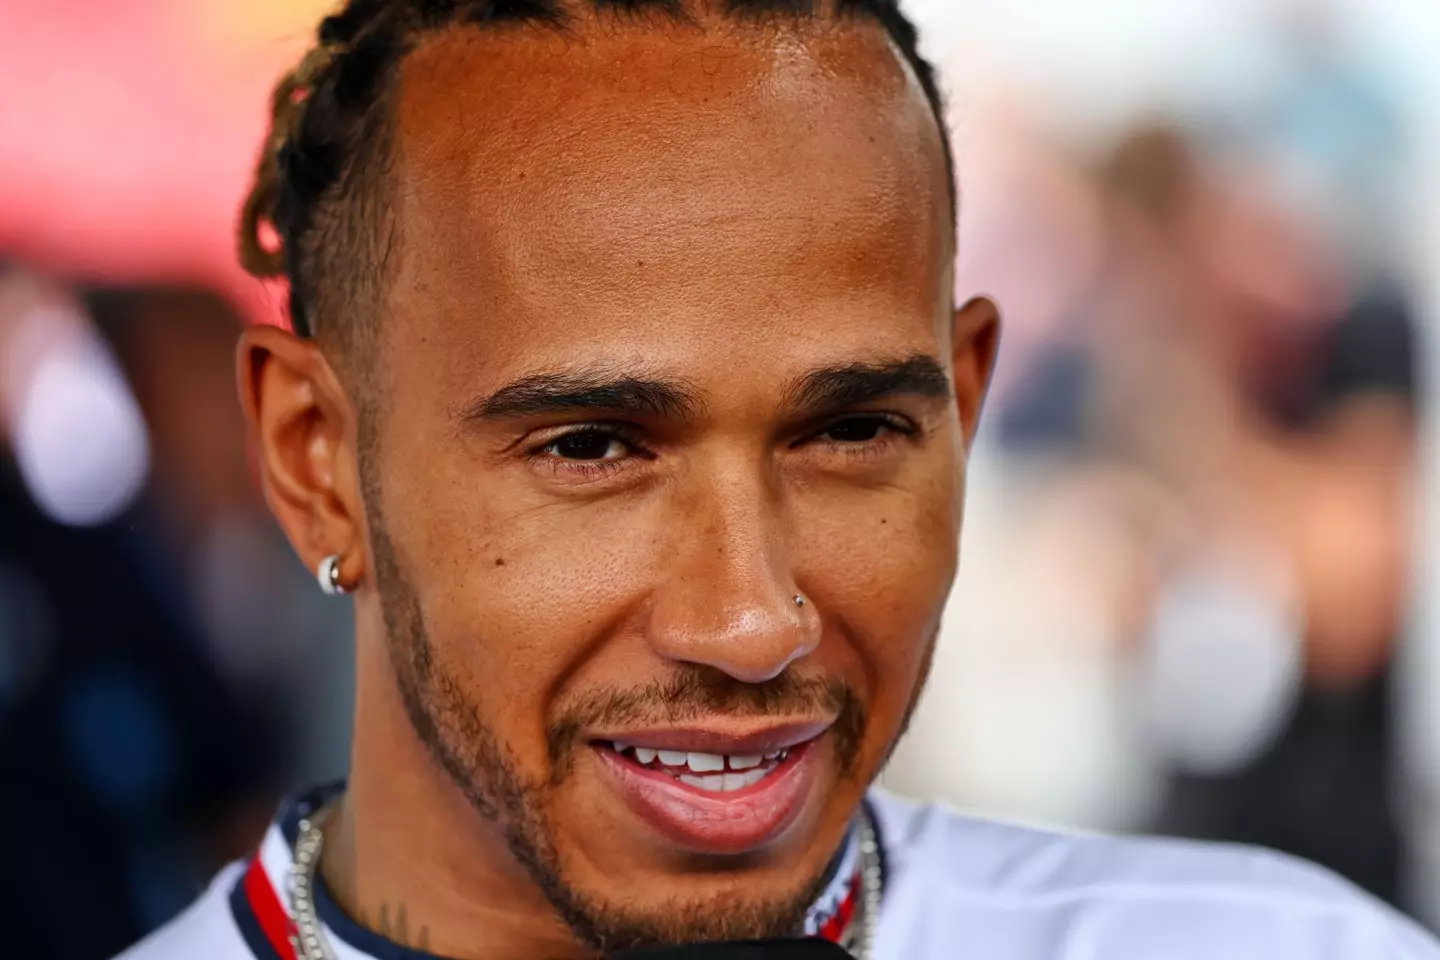 Lewis Hamilton could be banned for the British Grand Prix due to a row over wearing jewellery while racing.